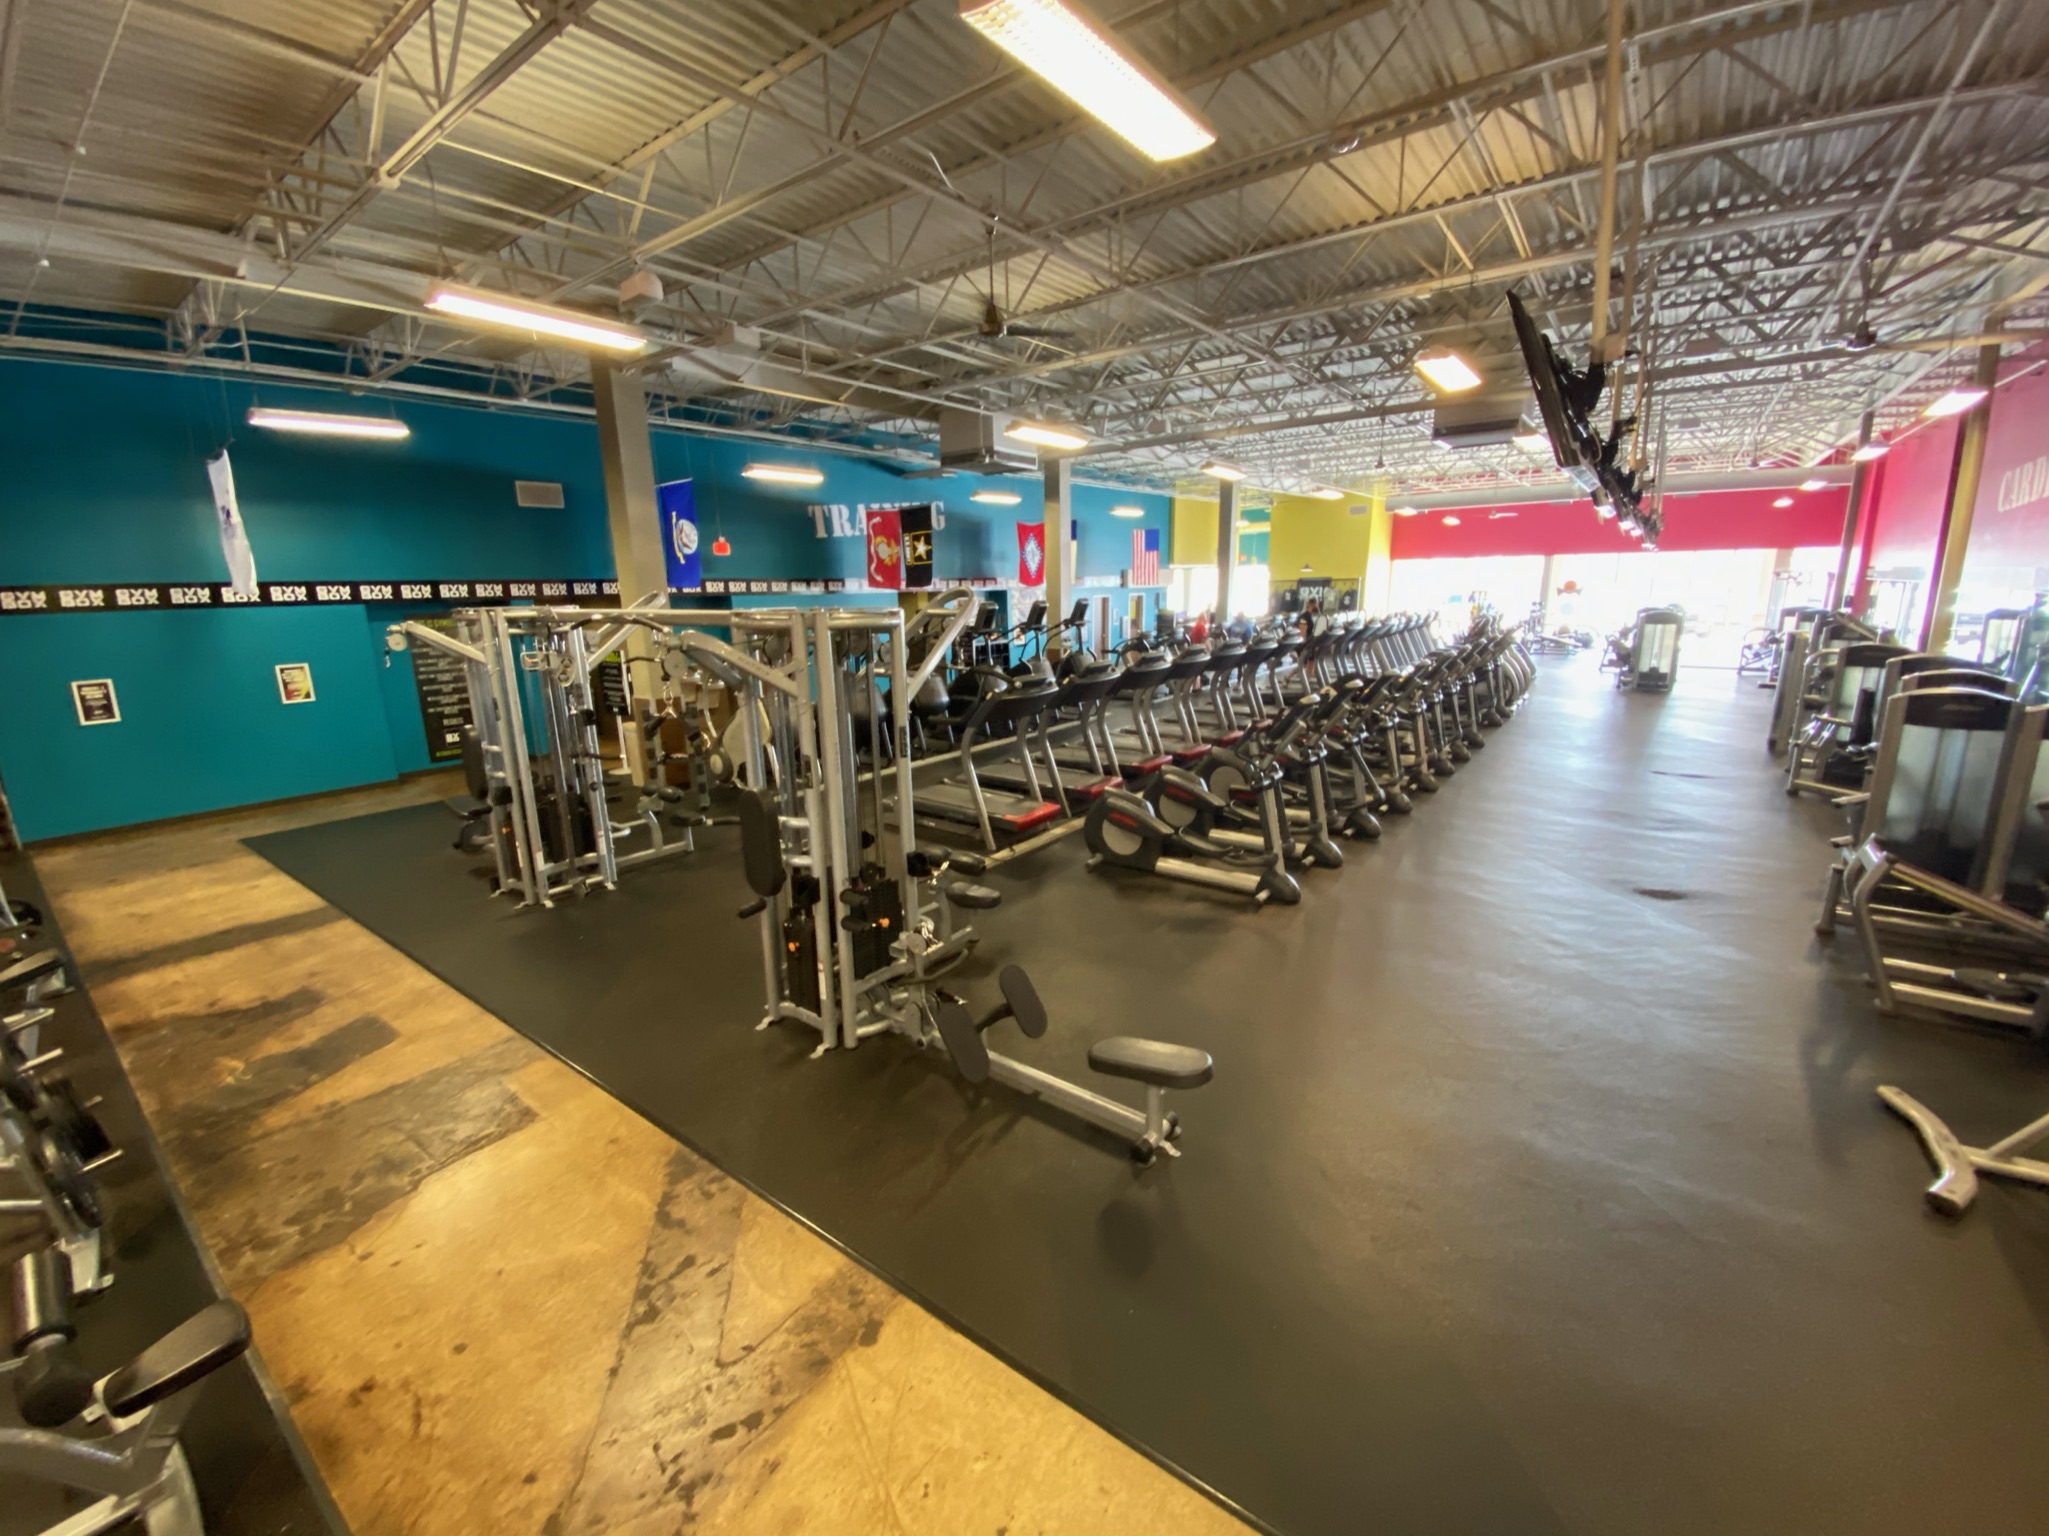 Find your gym home at GYMBOX Fitness in Texarkana